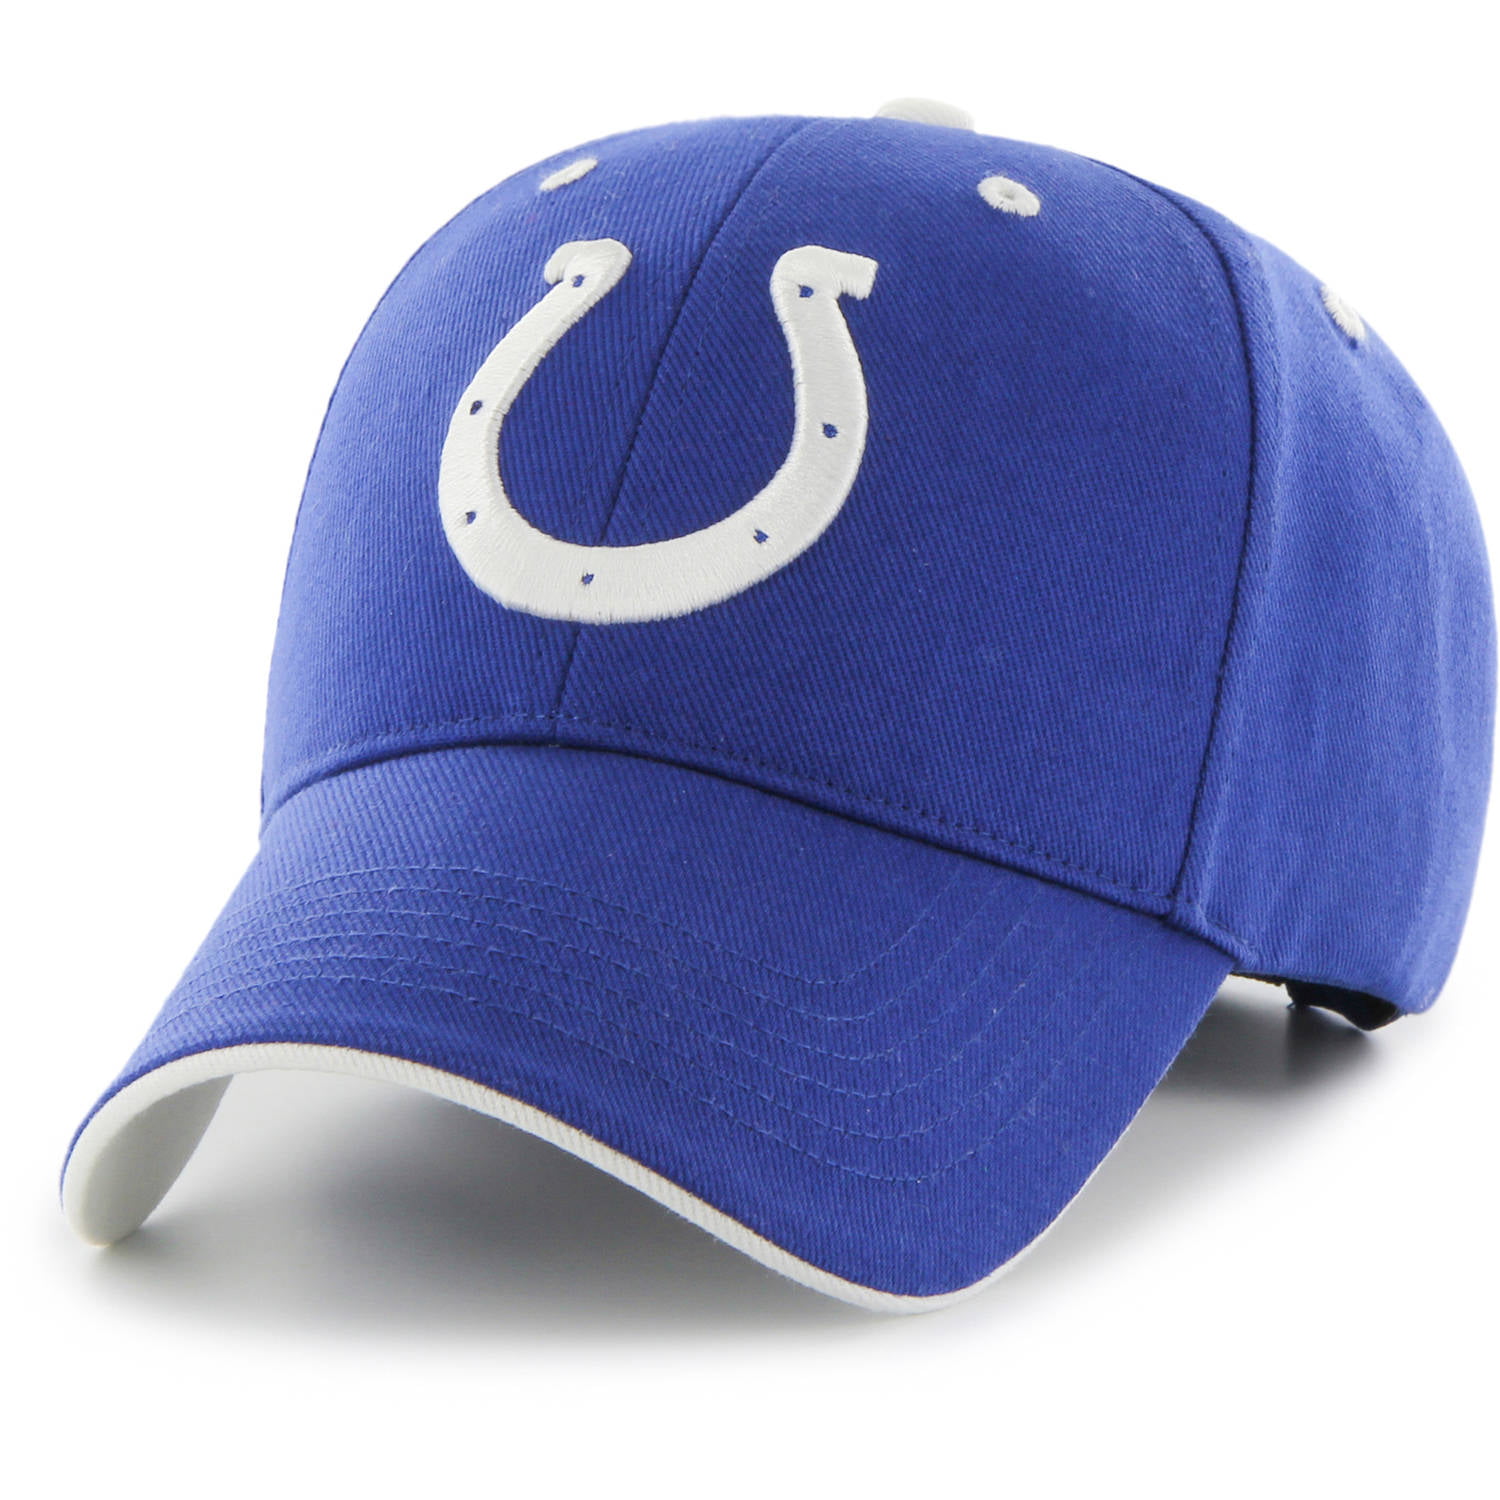 Indianapolis Colts kids hats,Limited 